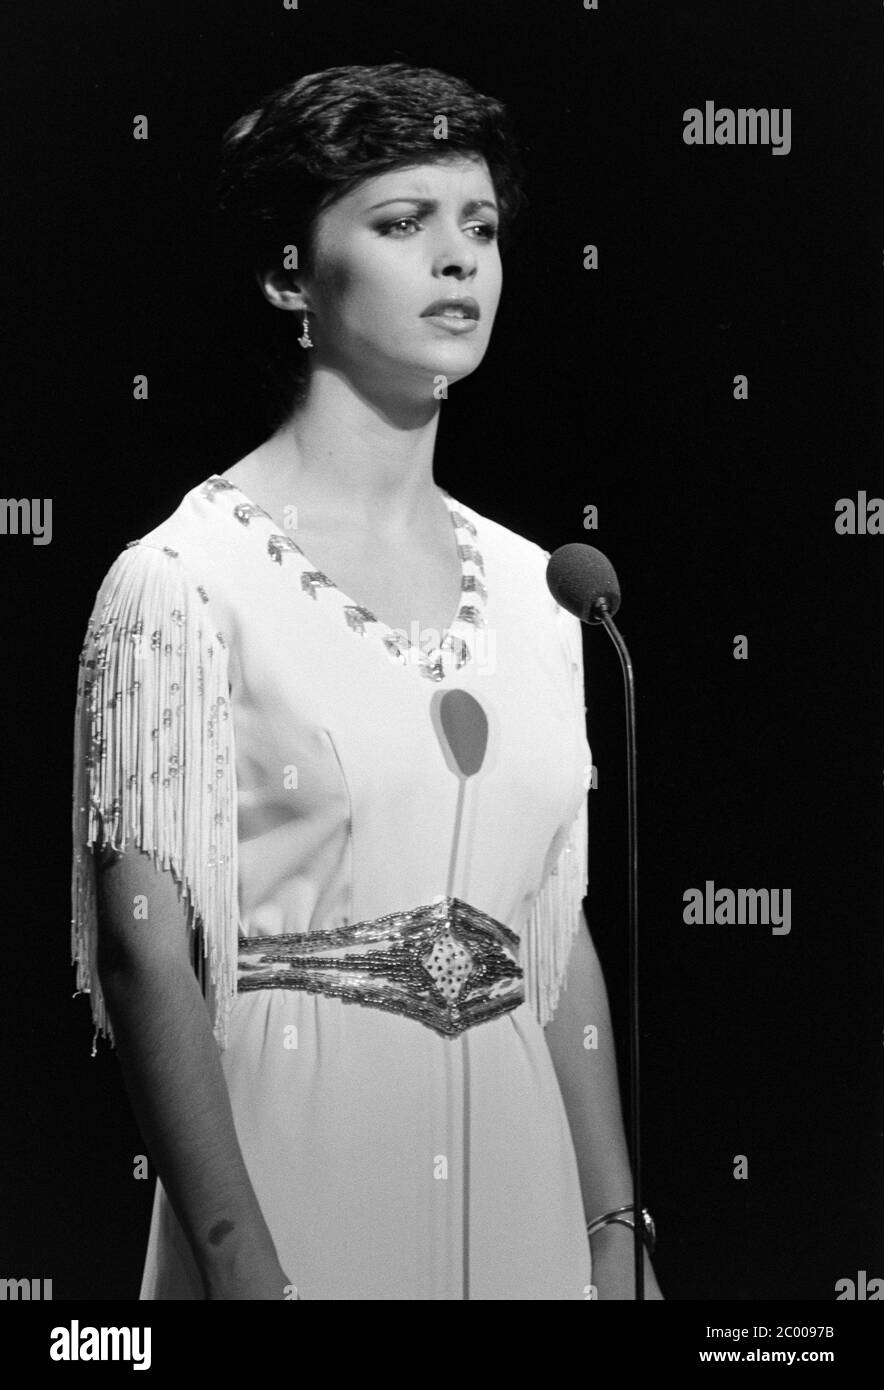 LONDON, UK. Nov 1980: Singer Sheena Easton at the rehearsals for the Royal Variety Performance at the London Palladium. © Paul Smith/Featureflash Stock Photo